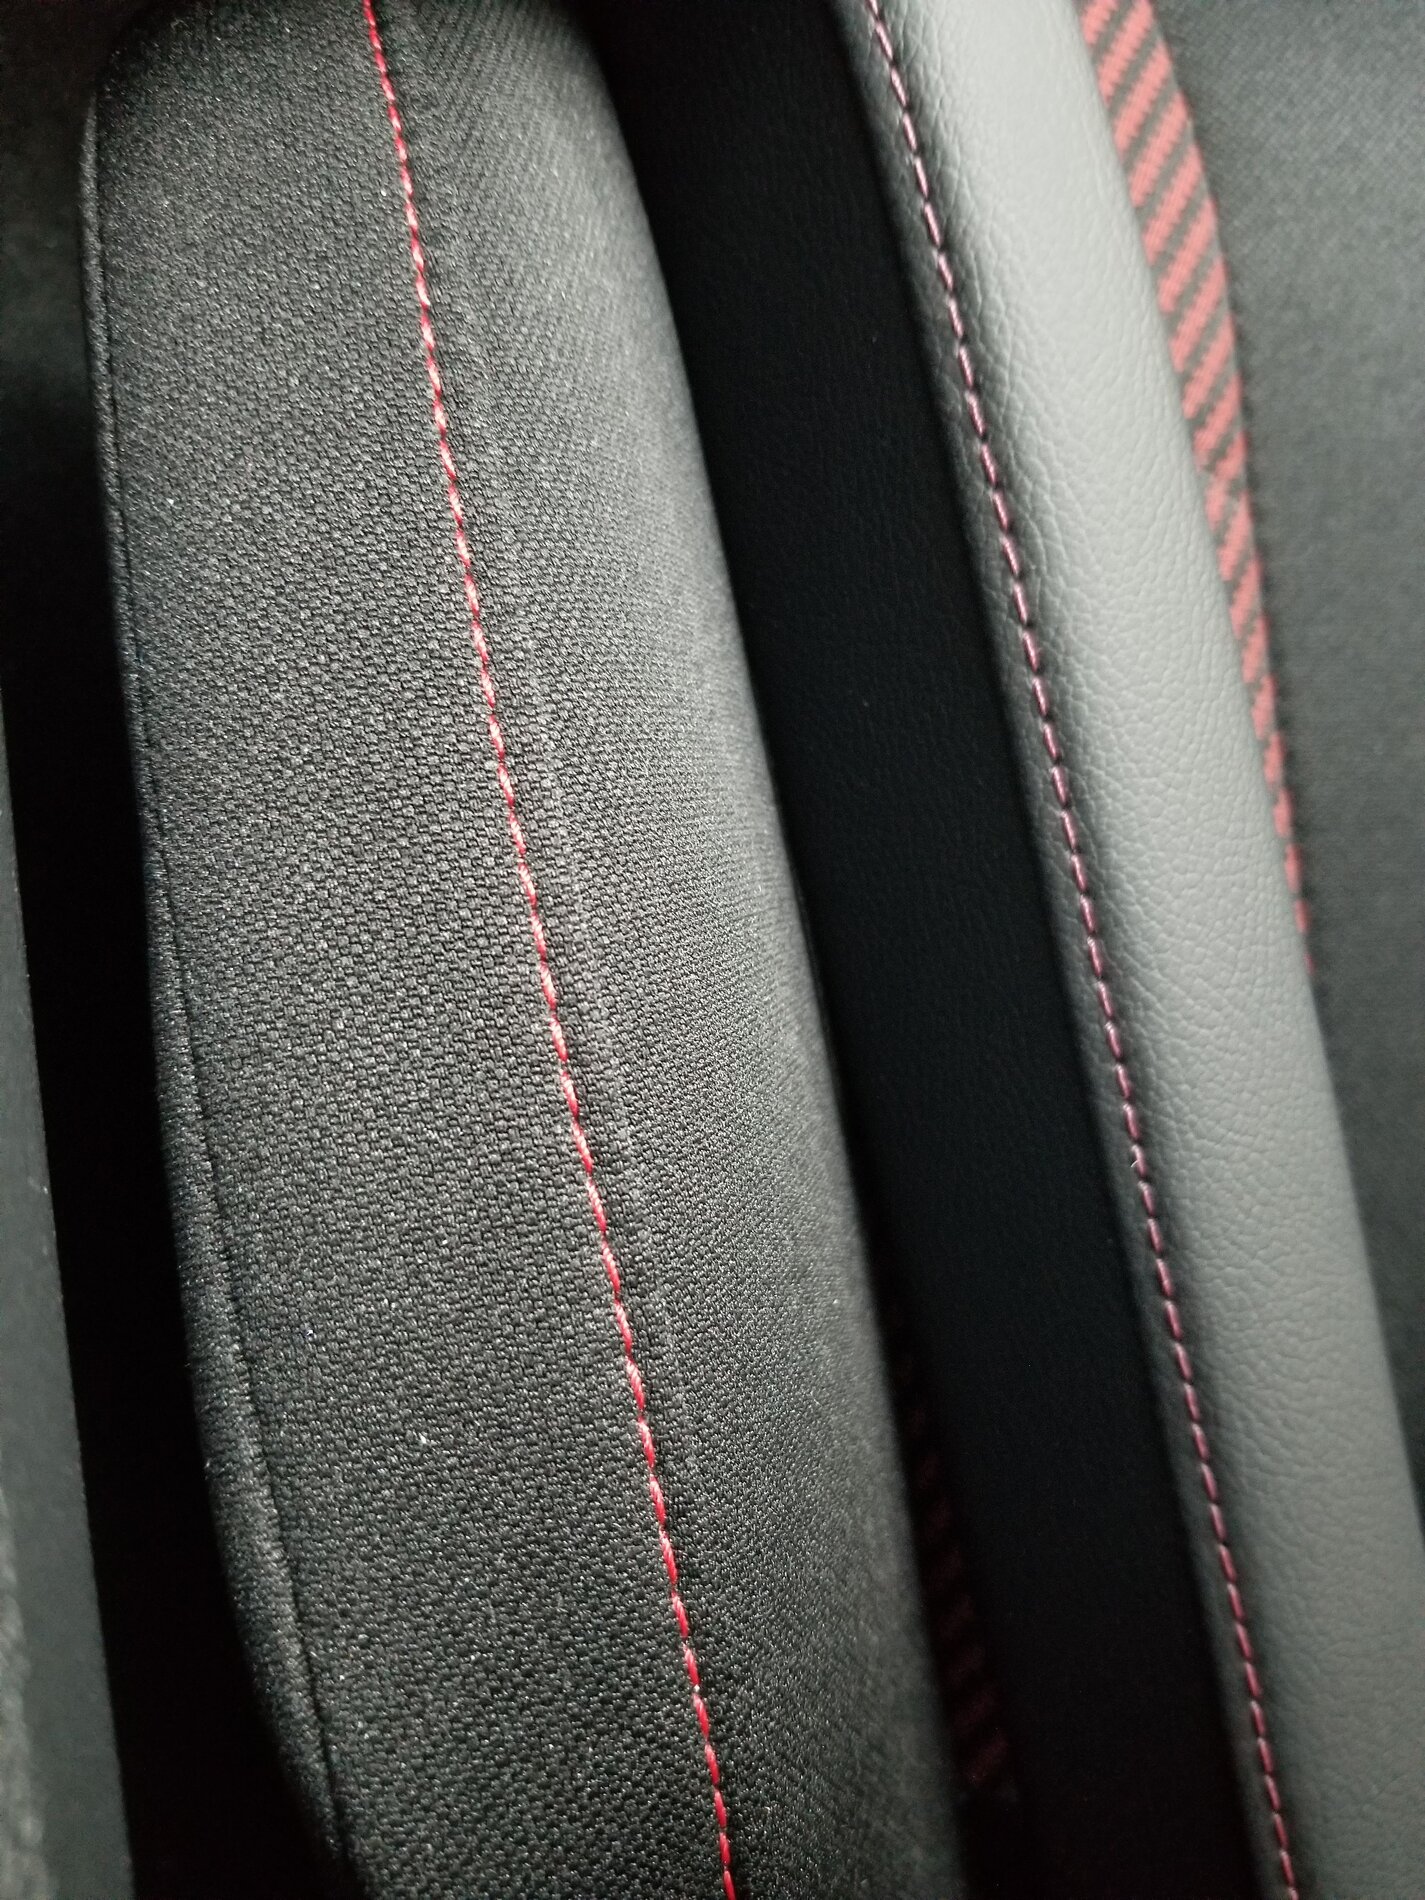 Fabric to leather armrest and center console swap | Page 10 | 2016 ...